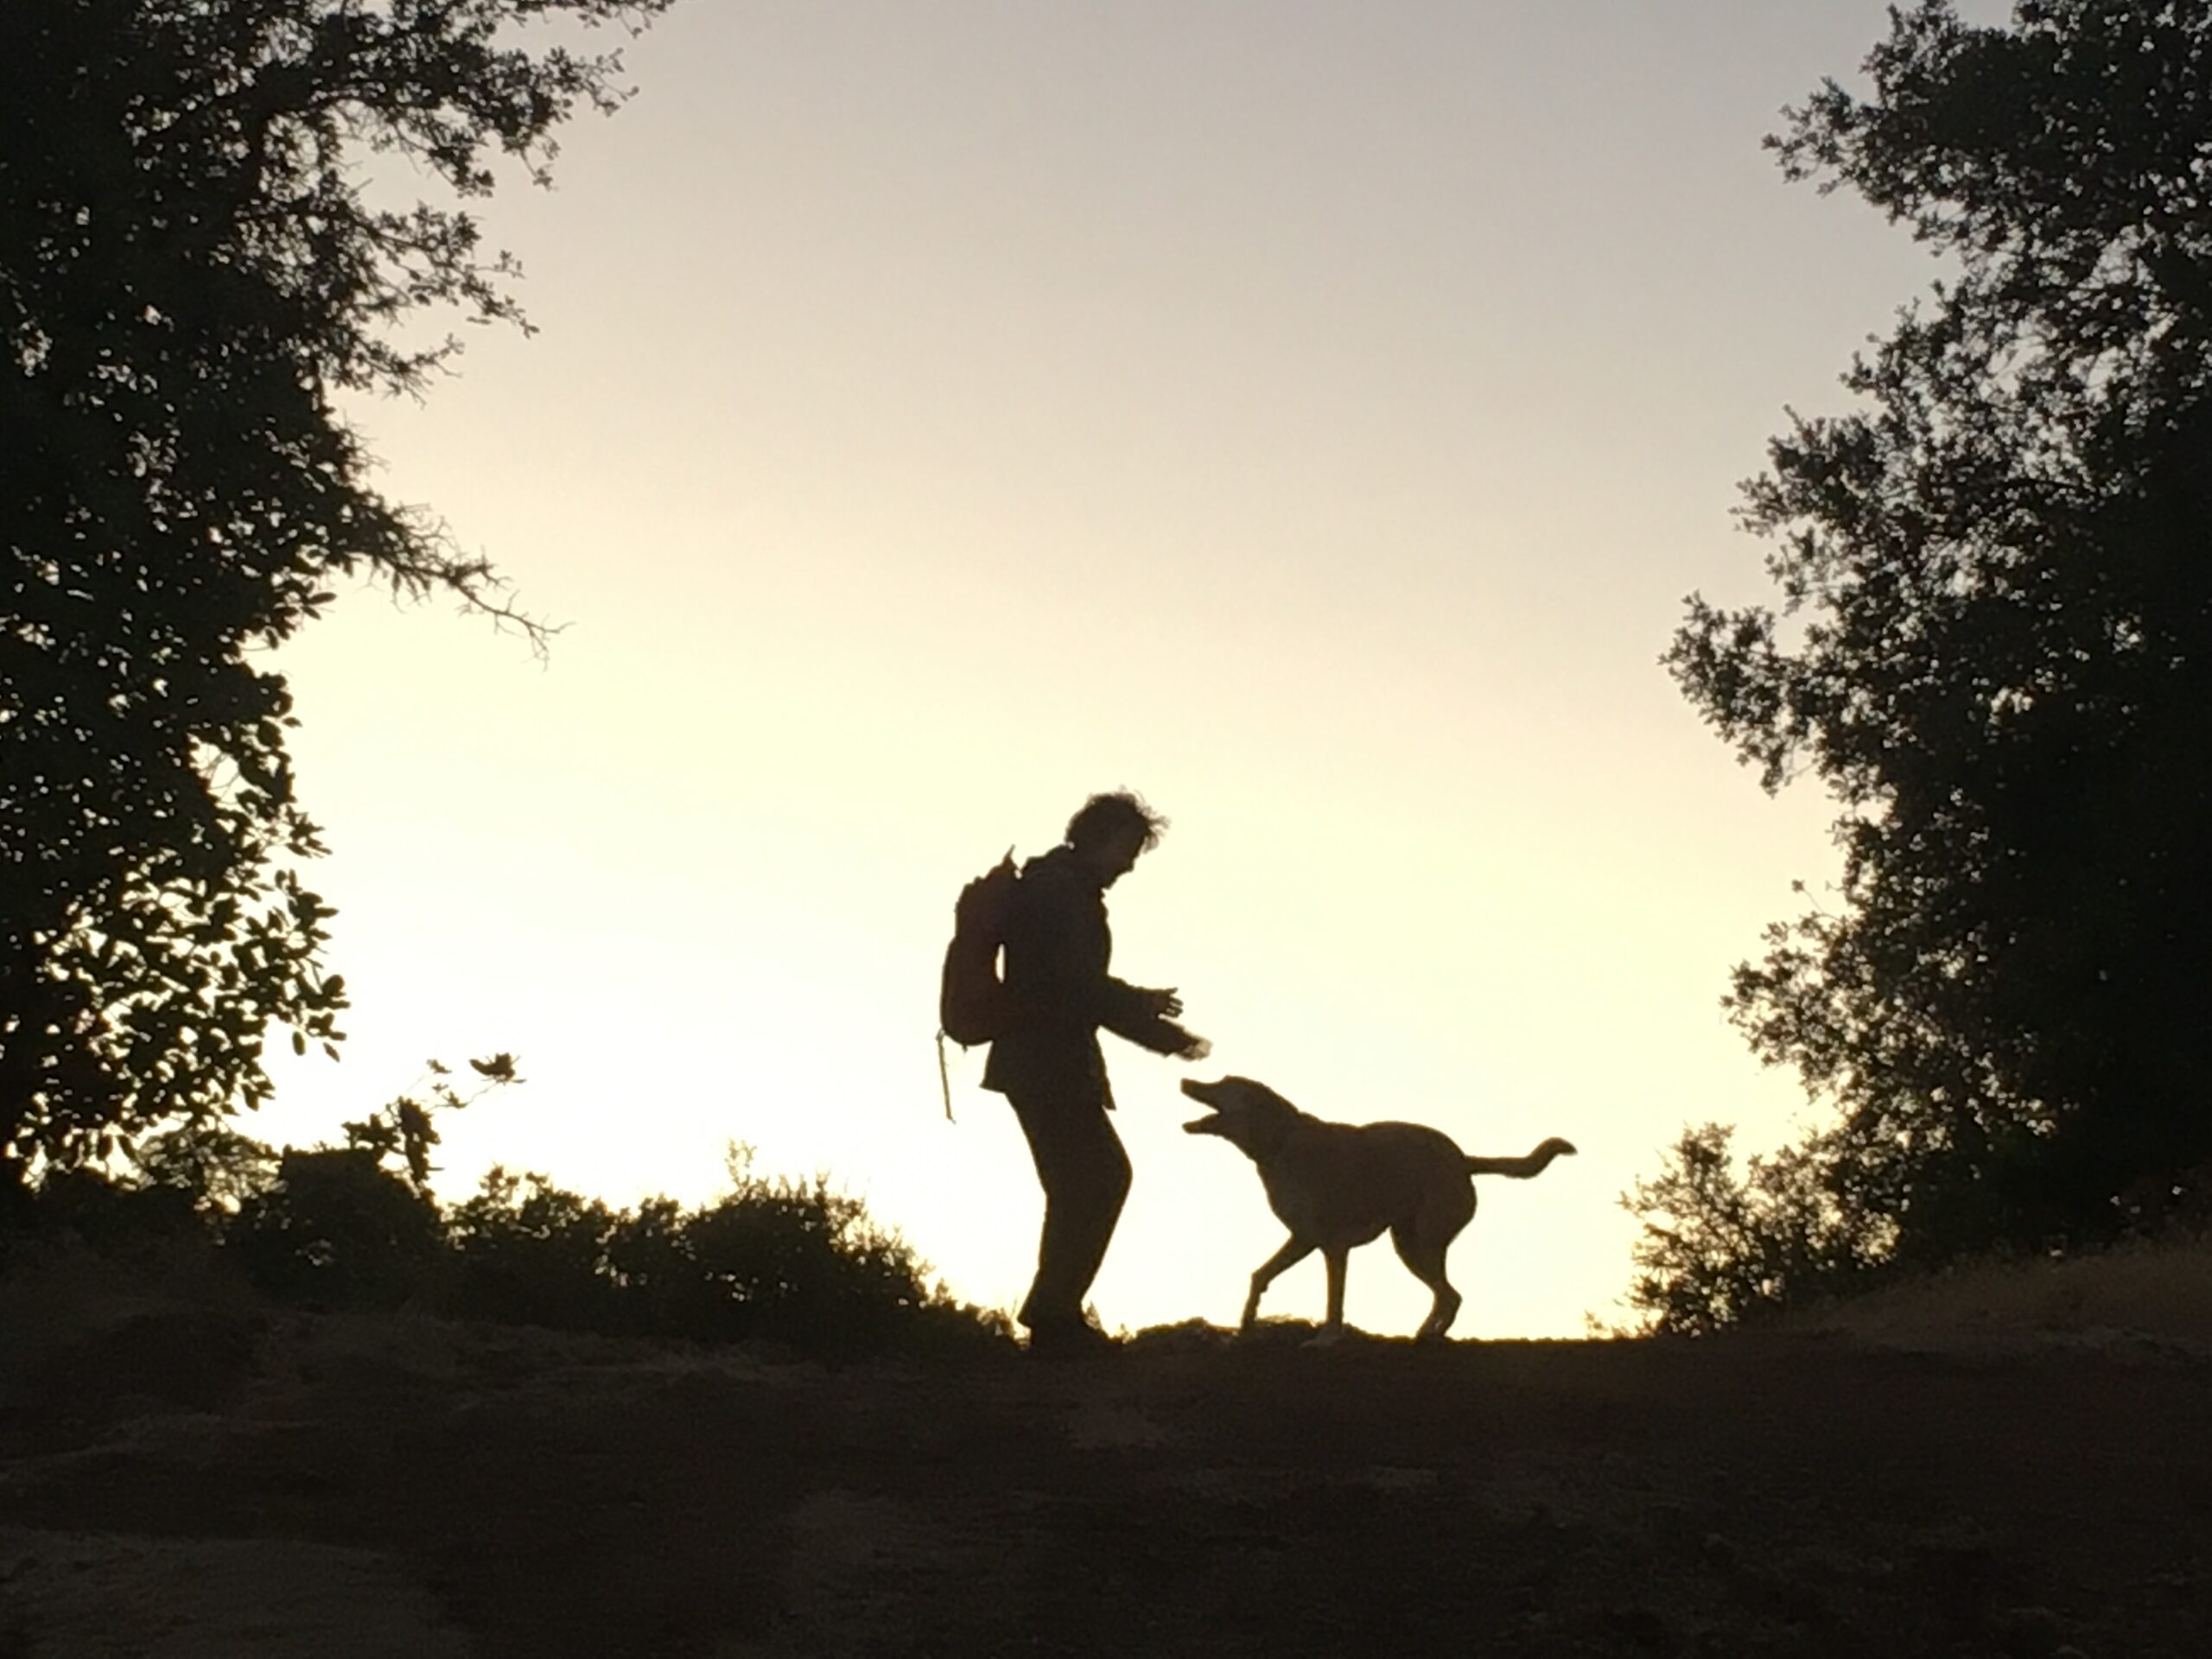 A man and a dog walking in the woods at sunset.